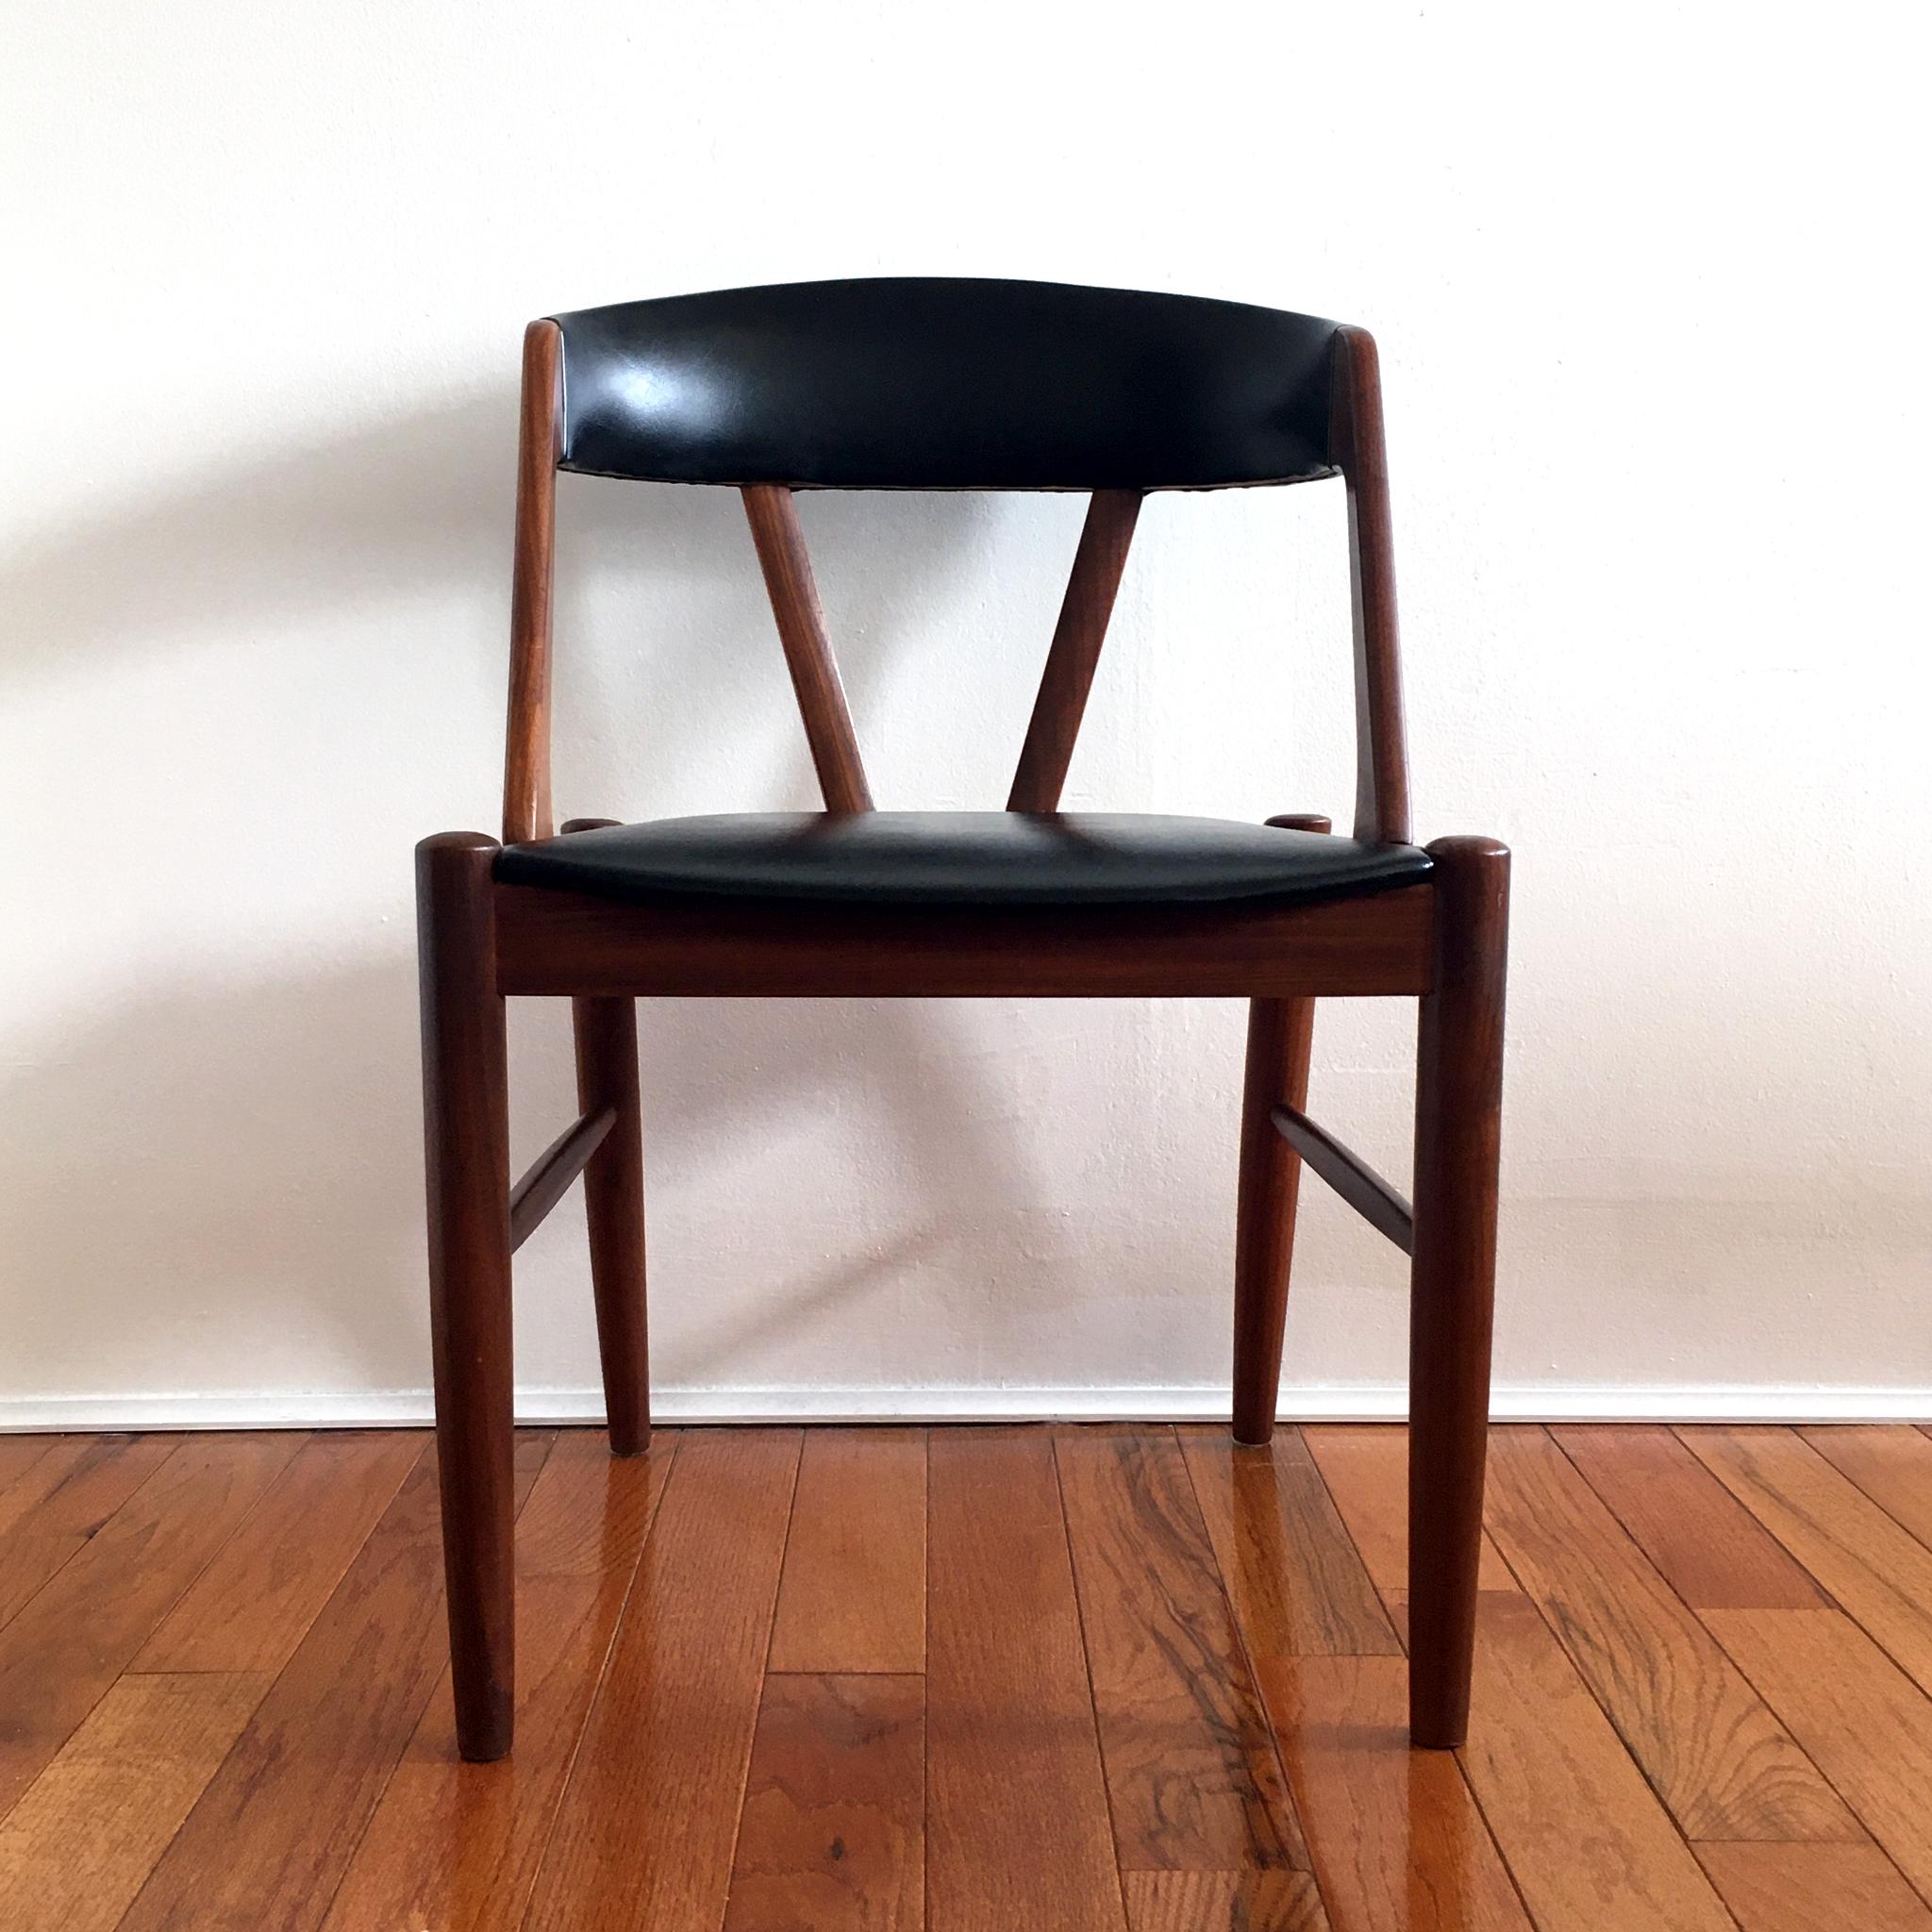 Beautiful midcentury chair in the style of Kai Kristiansen’s iconic Model 31 chair. Teak frame, with black faux leather seat and chair back.